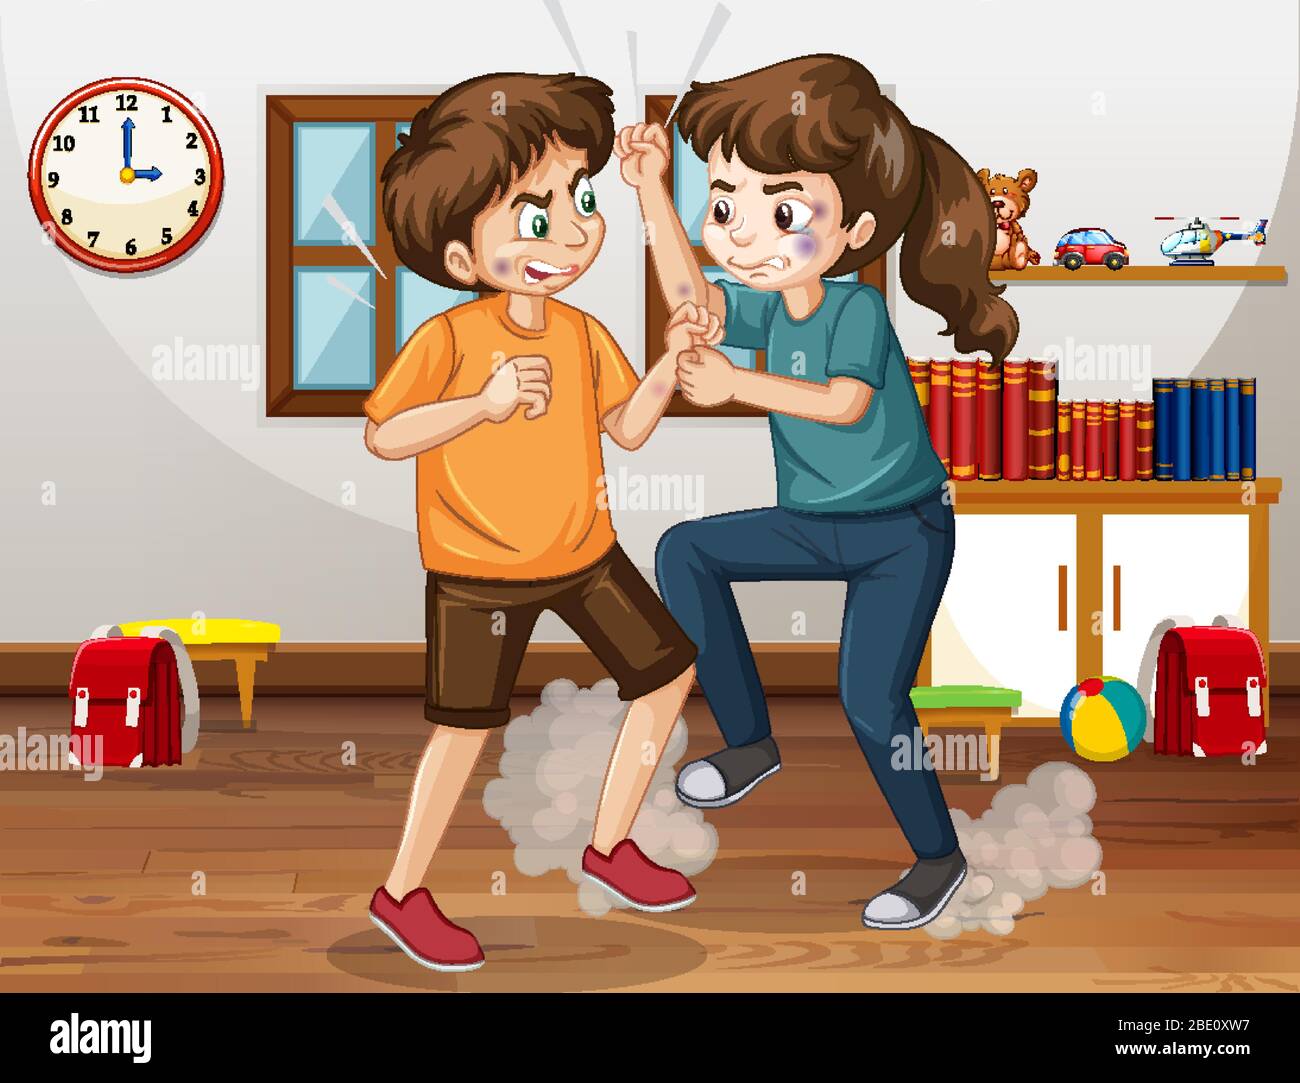 Domestic violence scene with people fighting at home illustration Stock Vector